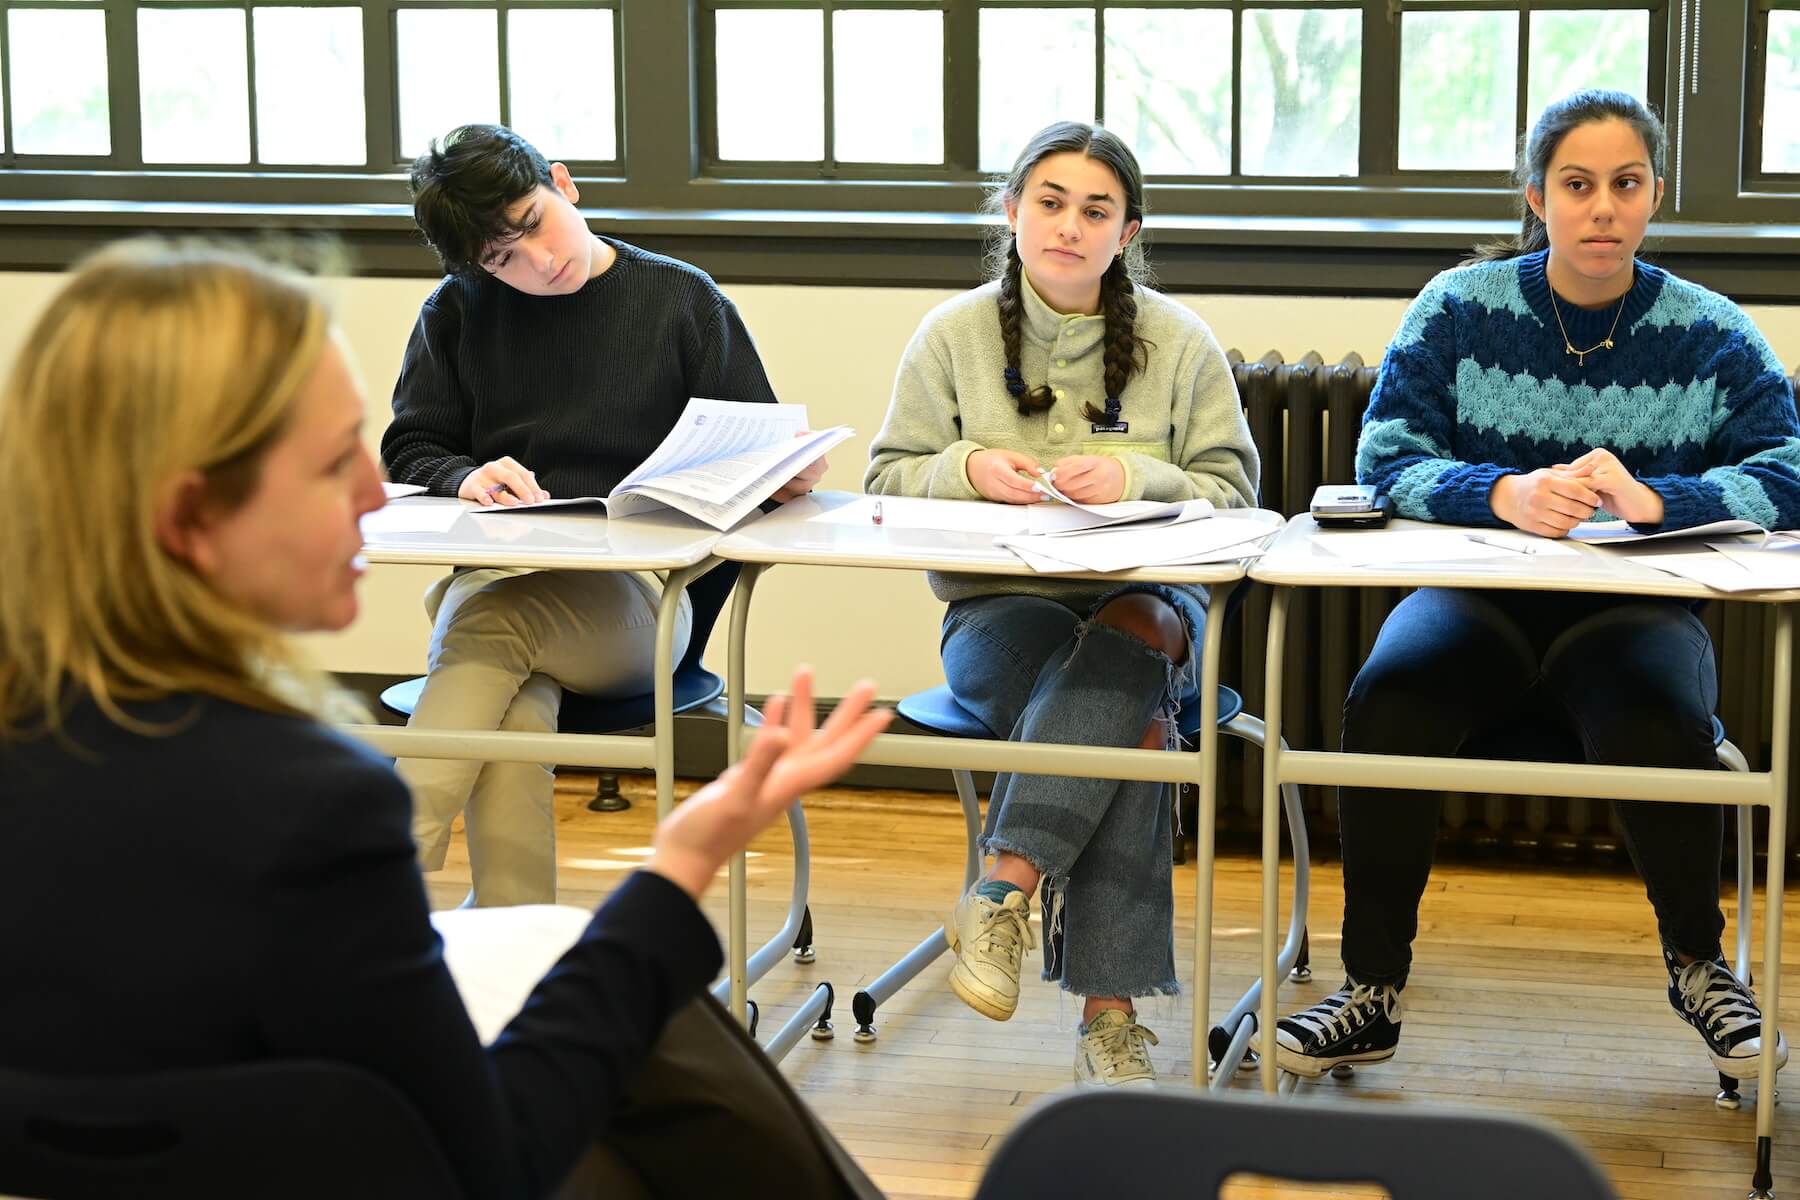 Ethical Culture Fieldston School Upper School students sitting in classroom during the College Symposium